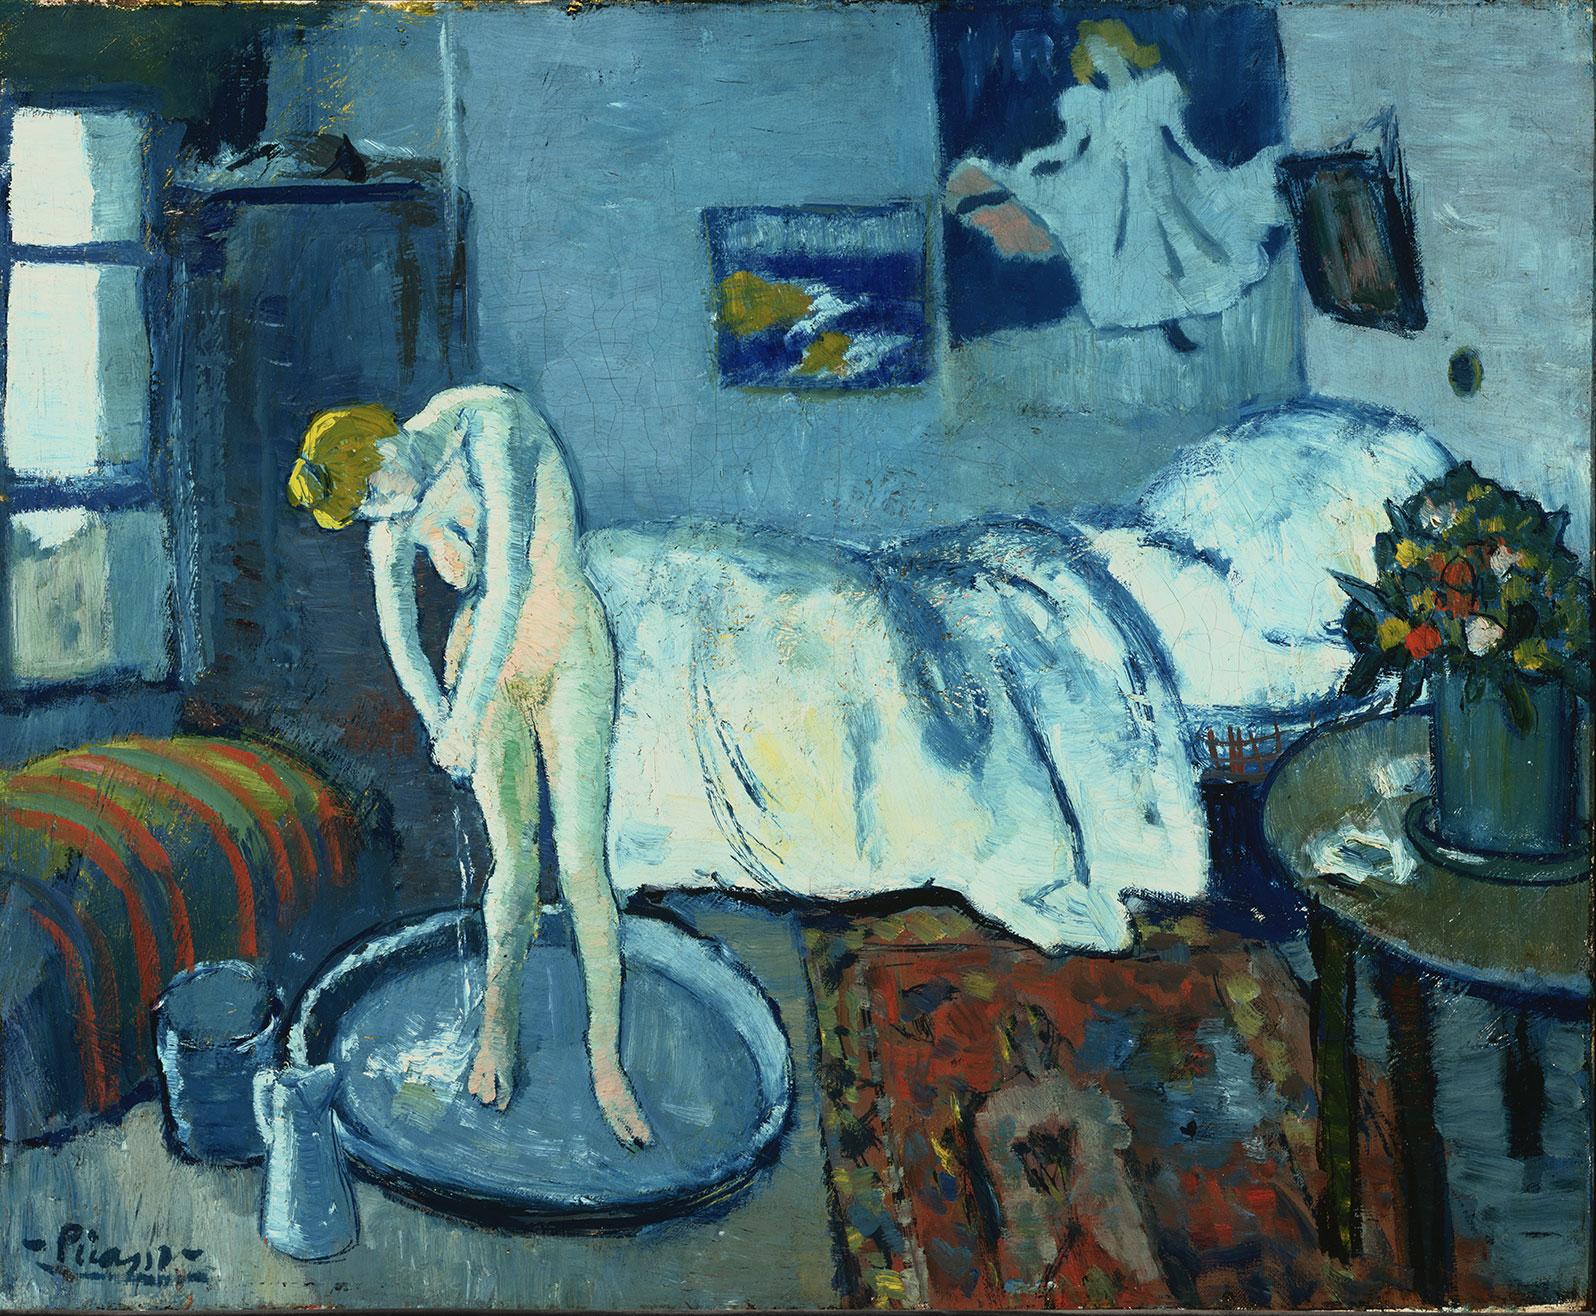 Picasso : Painting the Blue Period